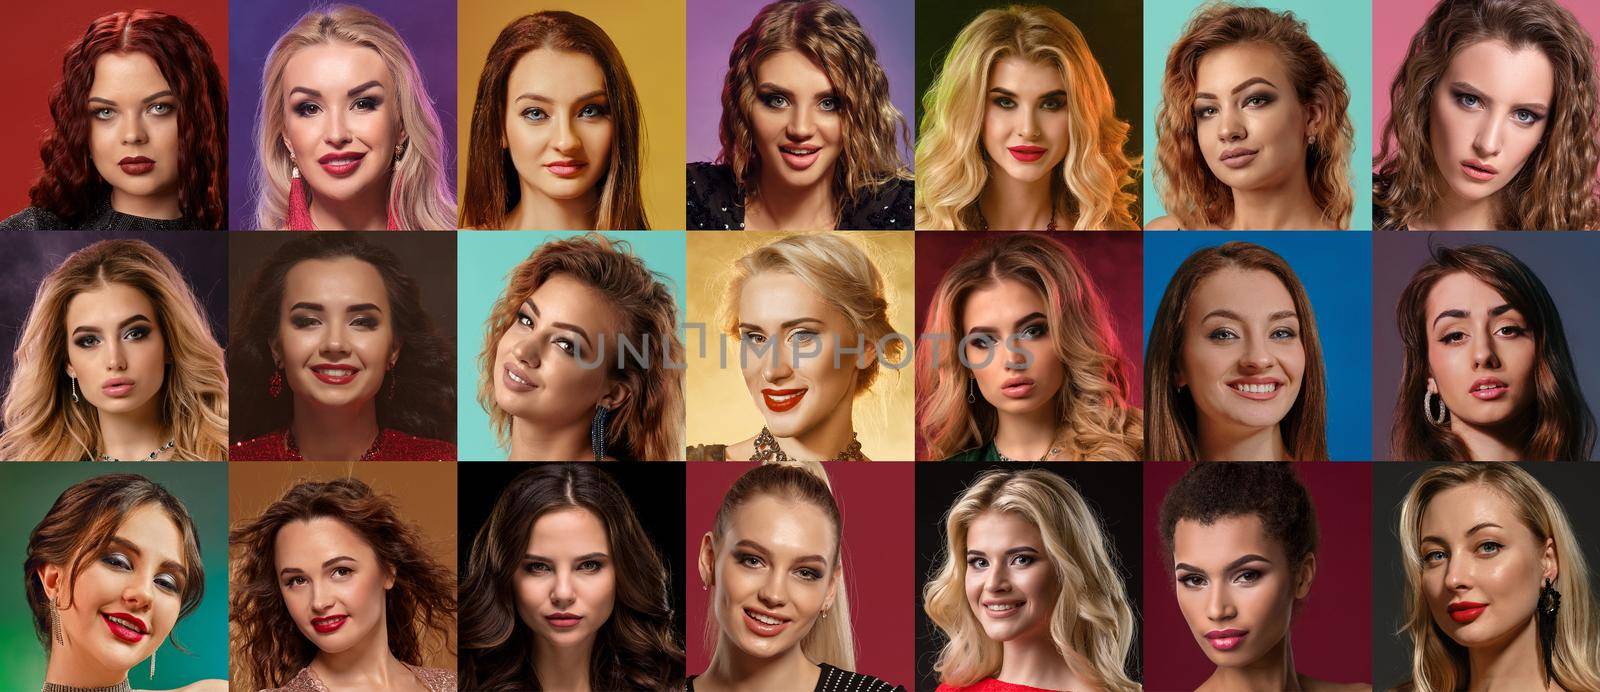 Collage of gorgeous women faces expressing different facial emotions. Studio shot against colorful backgrounds by nazarovsergey